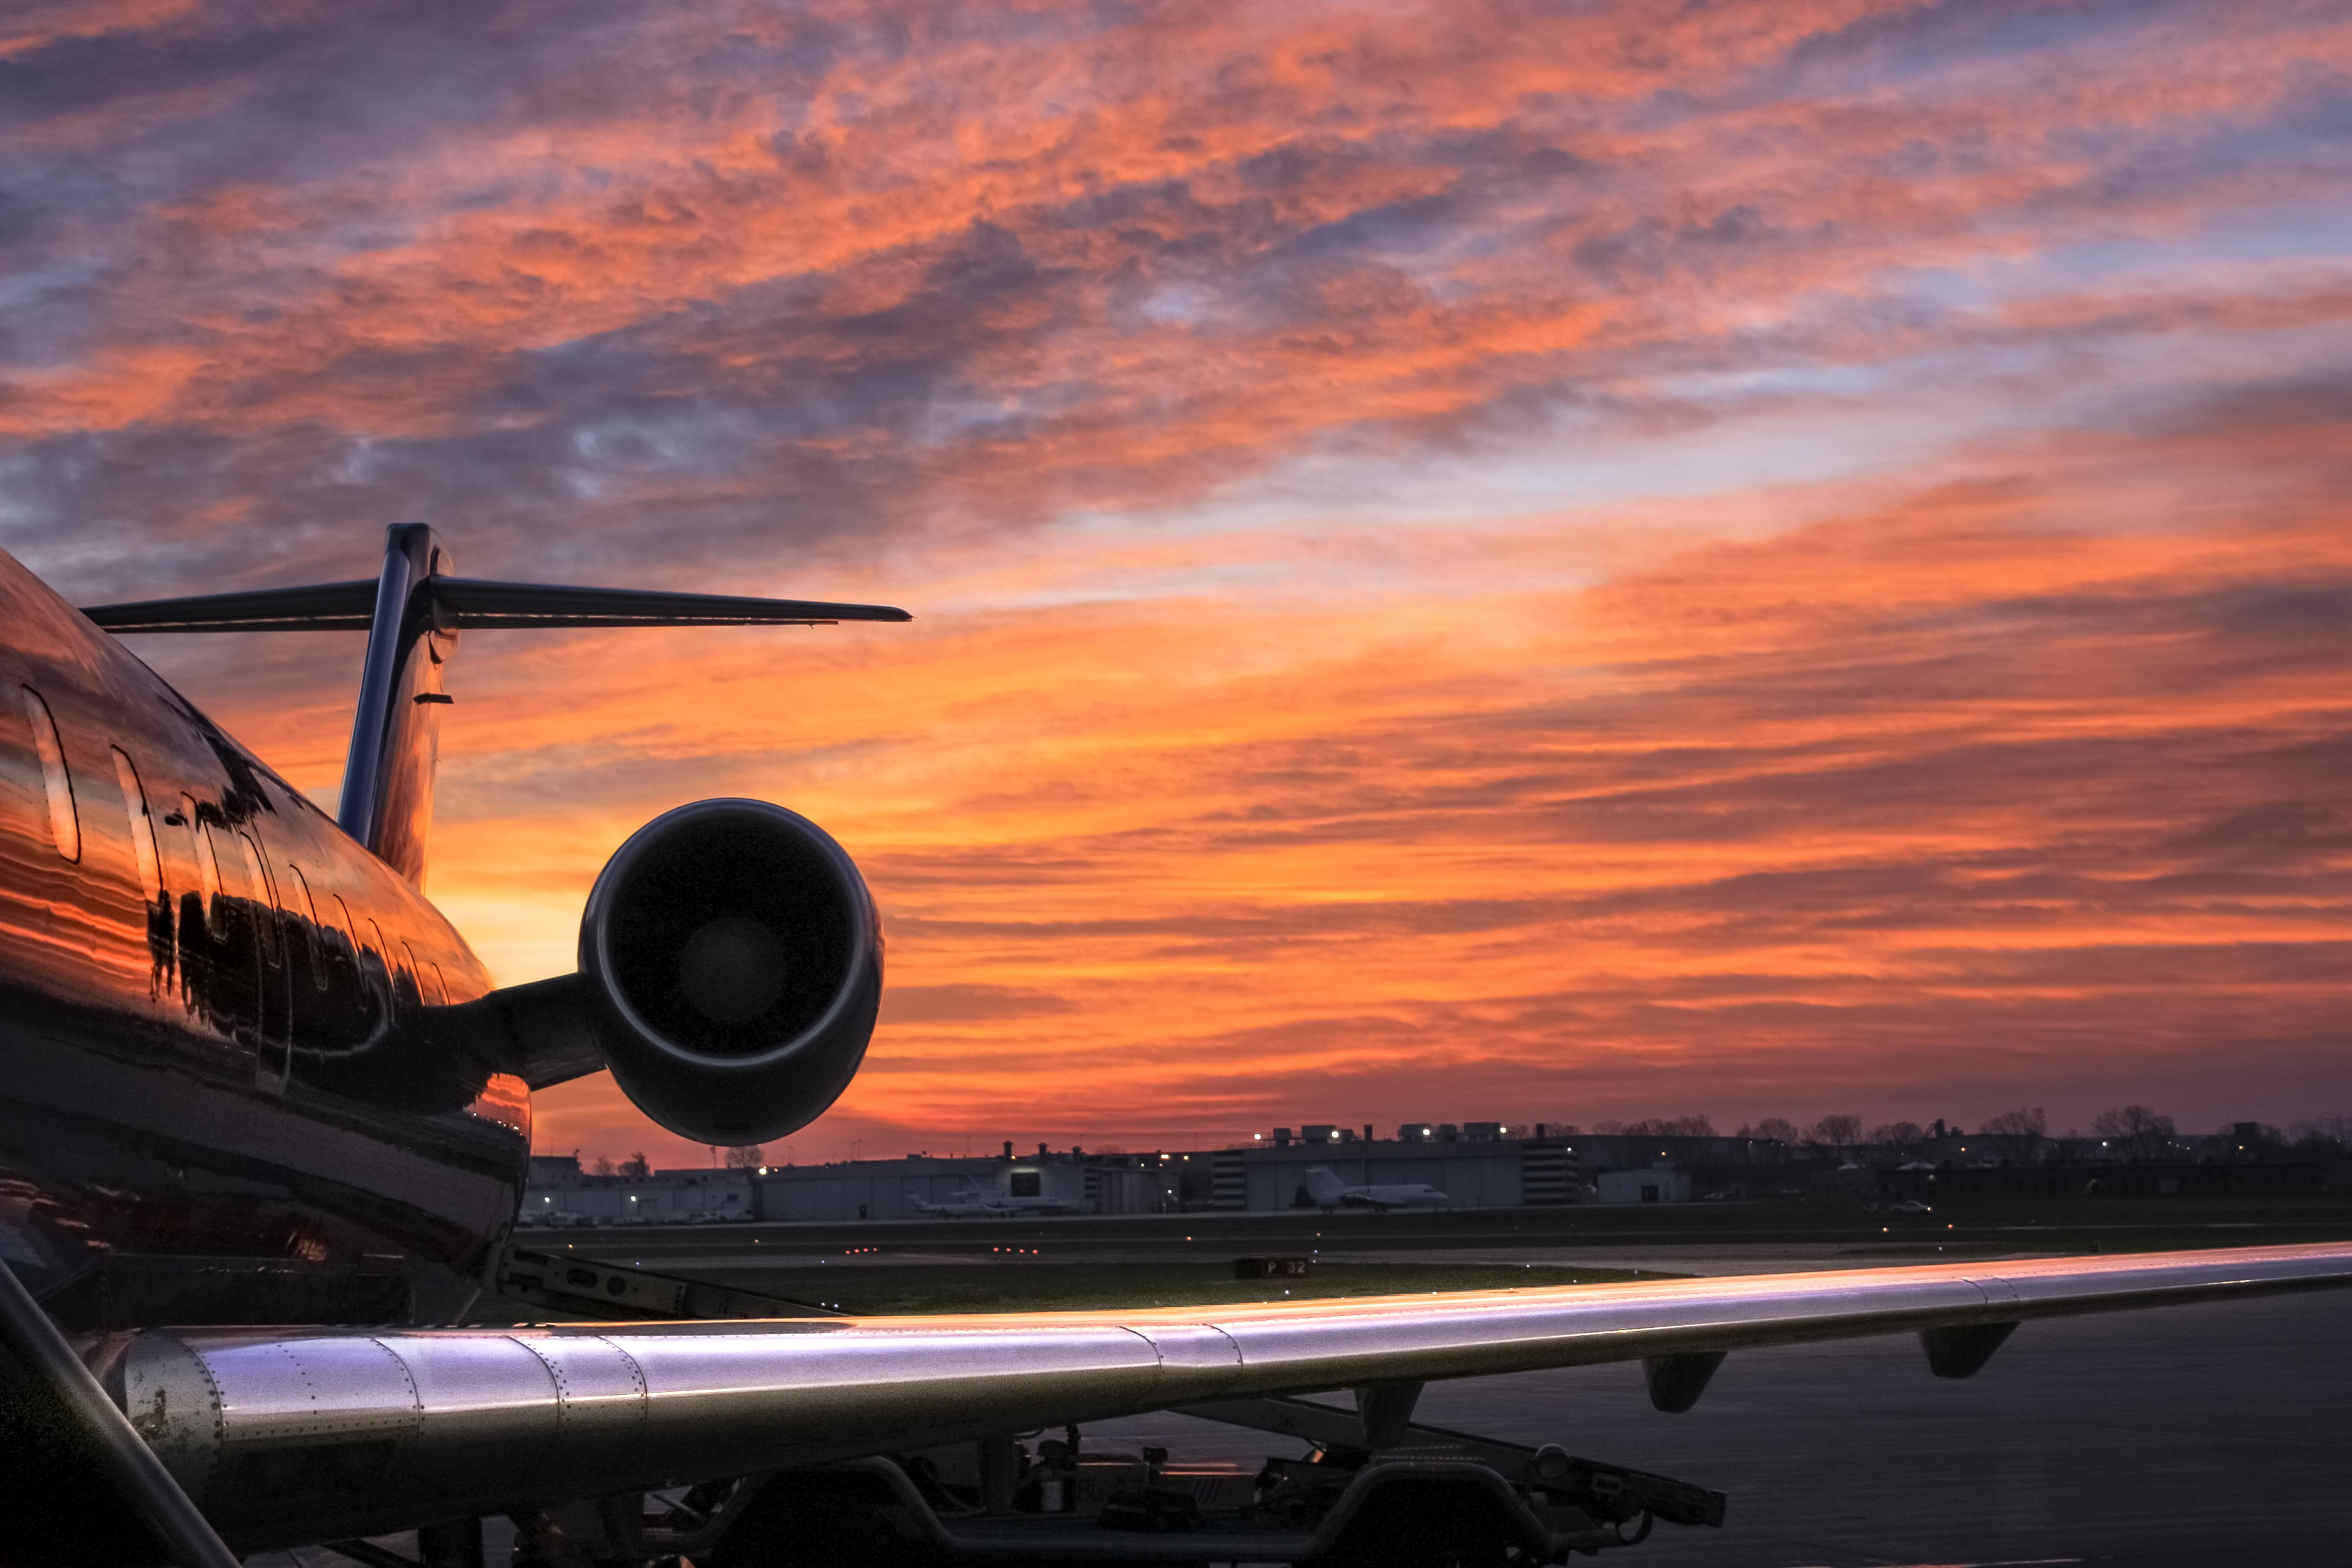 Airplane At Sunset Royalty Free Stock Photo